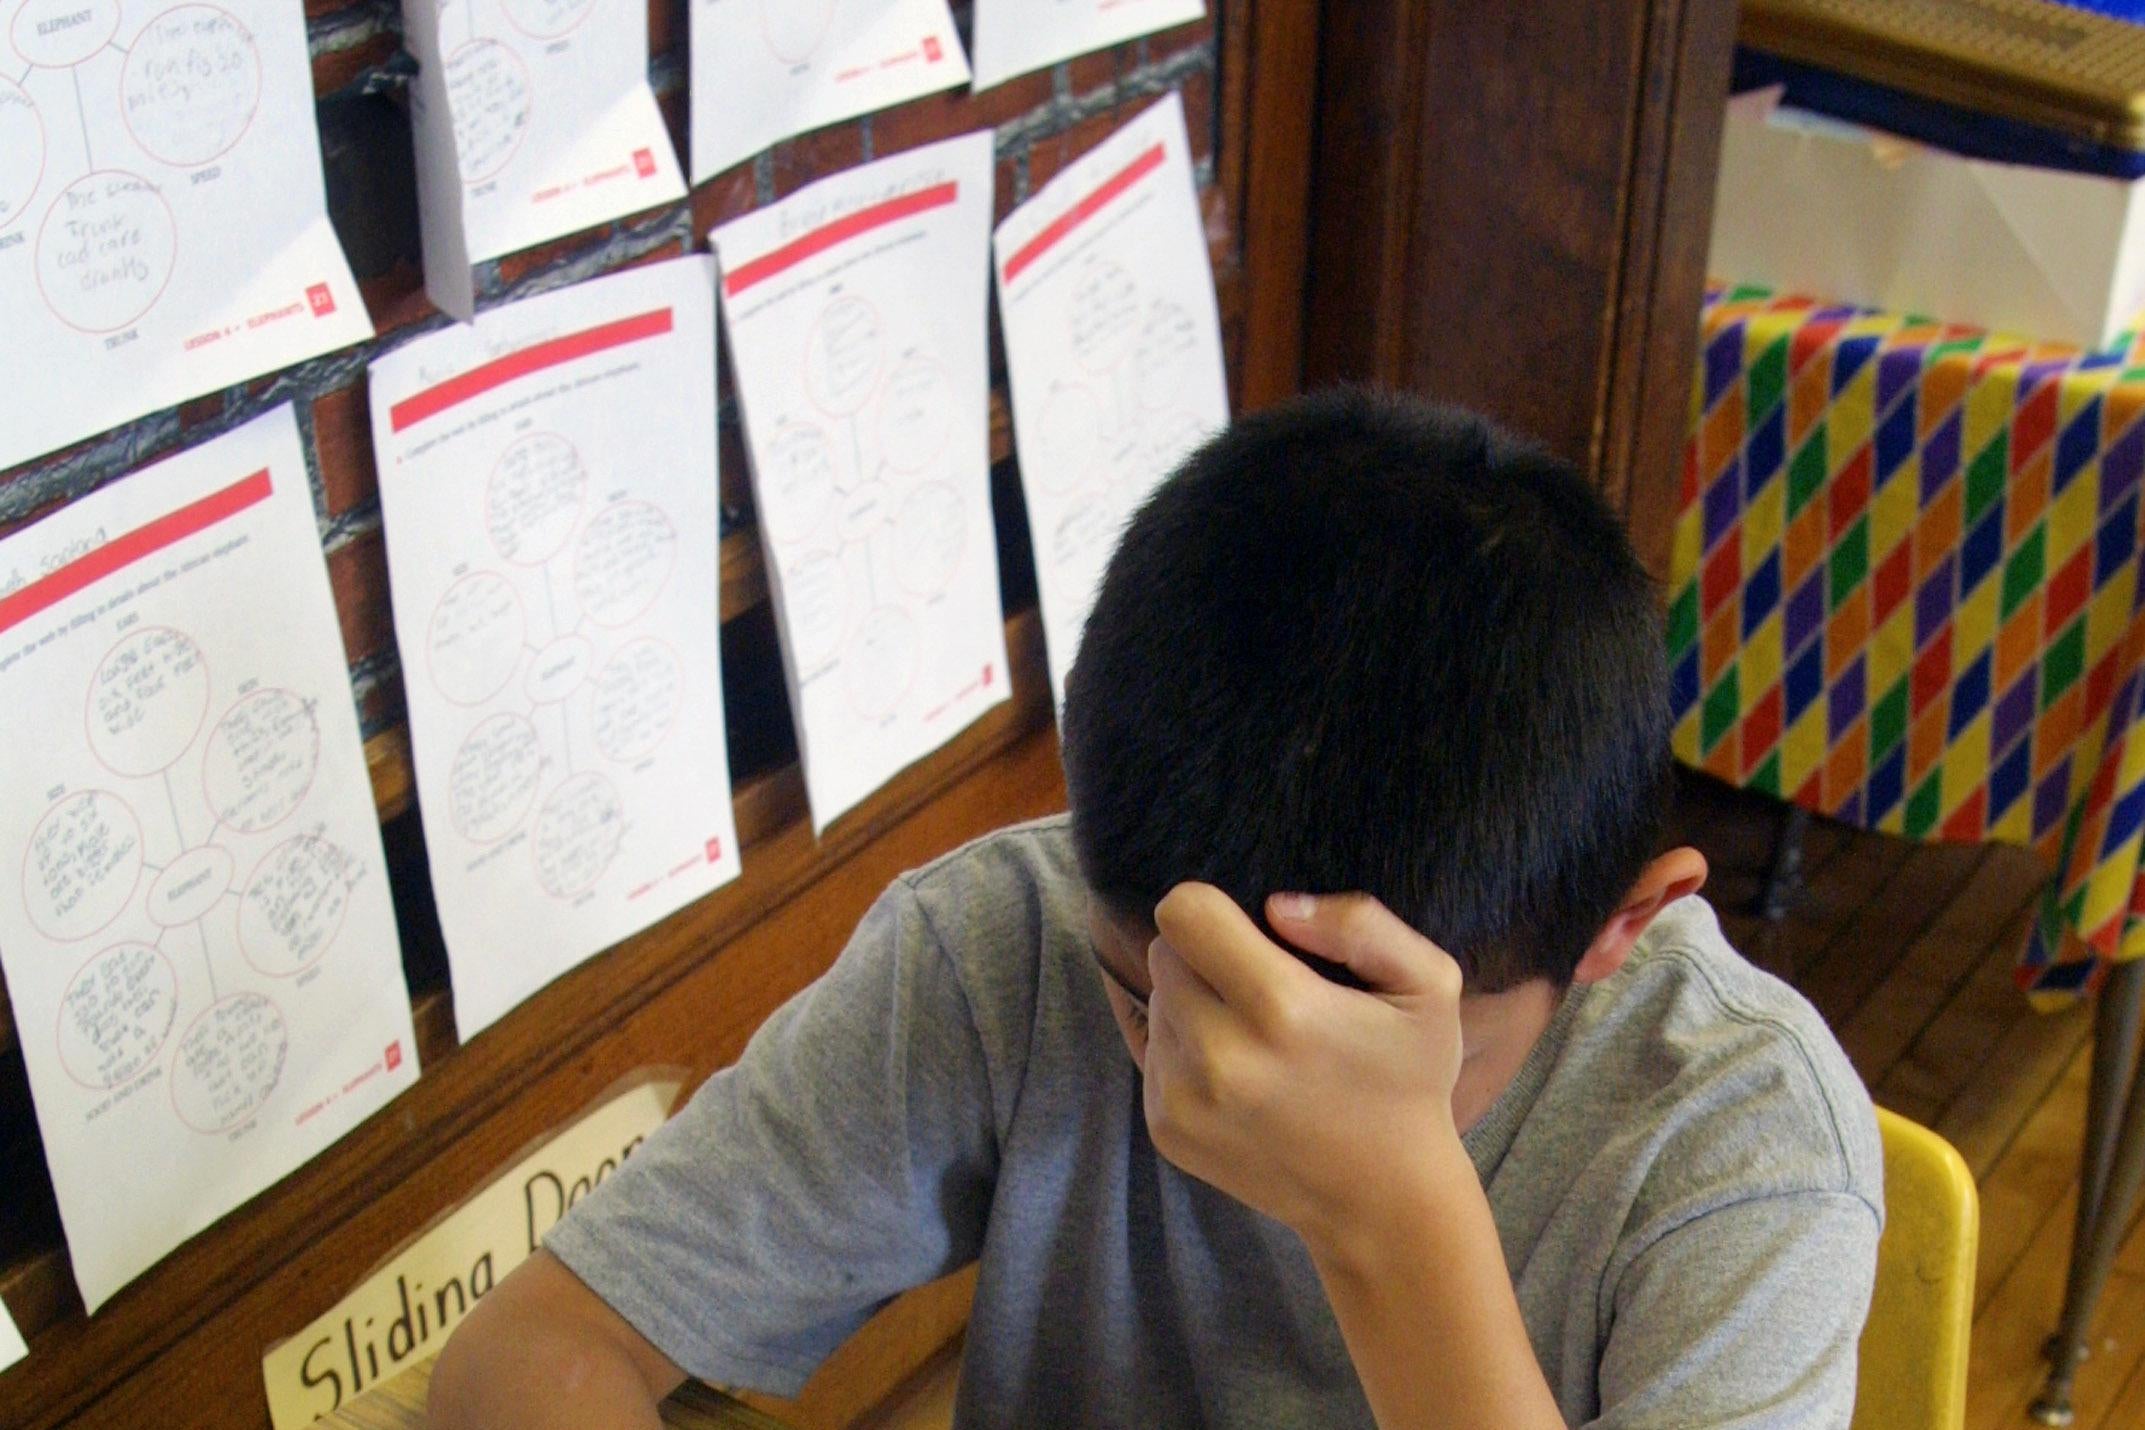 A middle school student holding a pencil works to solve a problem at a desk.